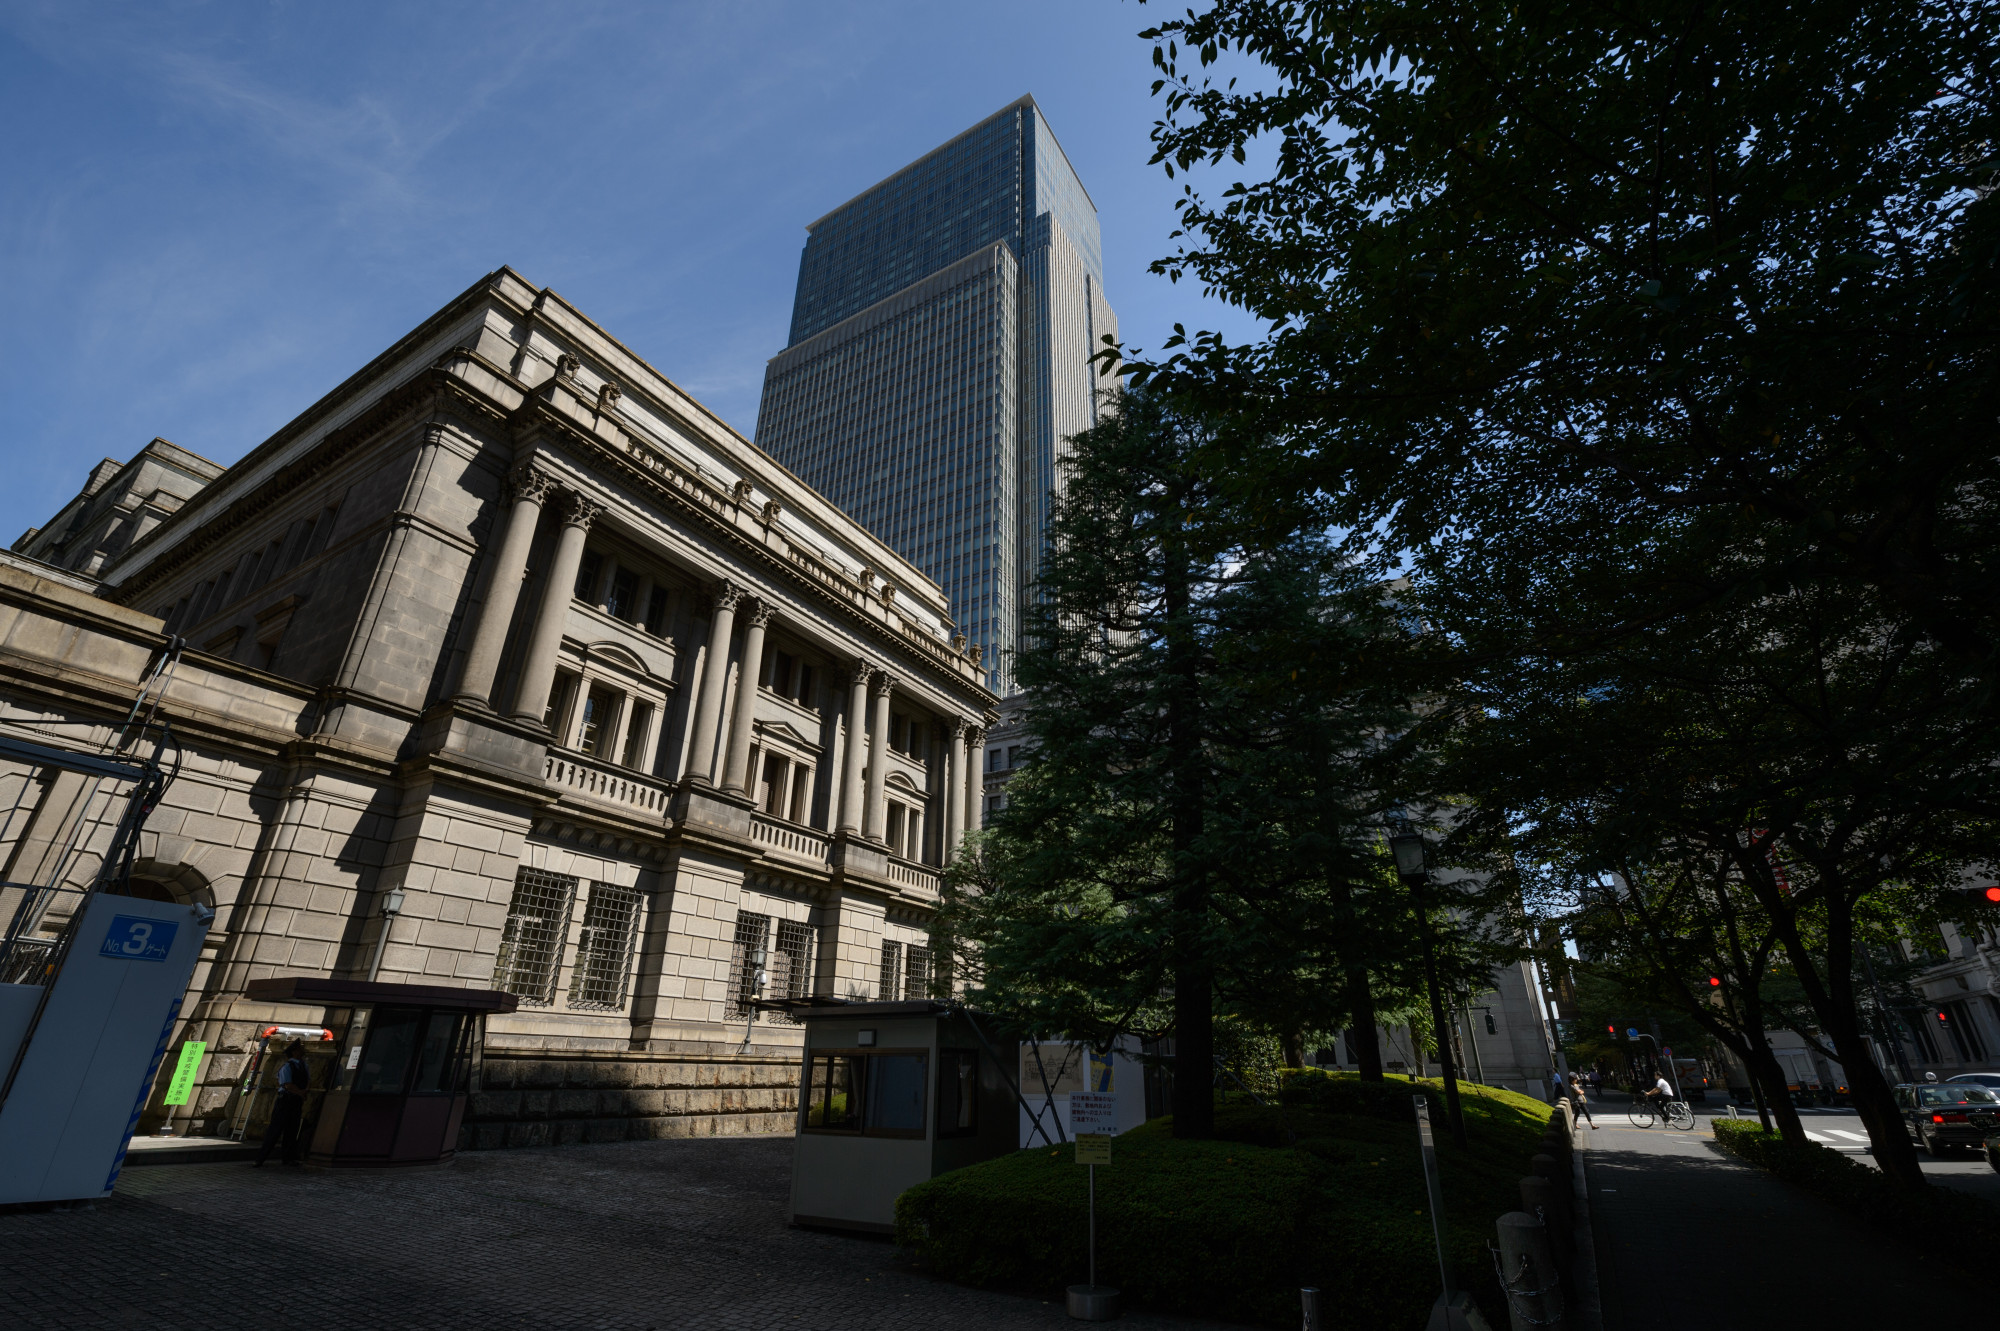 The Bank of Japan (BOJ) headquarters stands in Tokyo, Japan, on Wednesday, Sept. 13, 2017. The BOJ's next monetary policy meeting is scheduled for Sept. 21. The central bank pushed back in July the projected timing for reaching its 2 percent inflation target for the sixth time as economic growth failed to drive price gains.